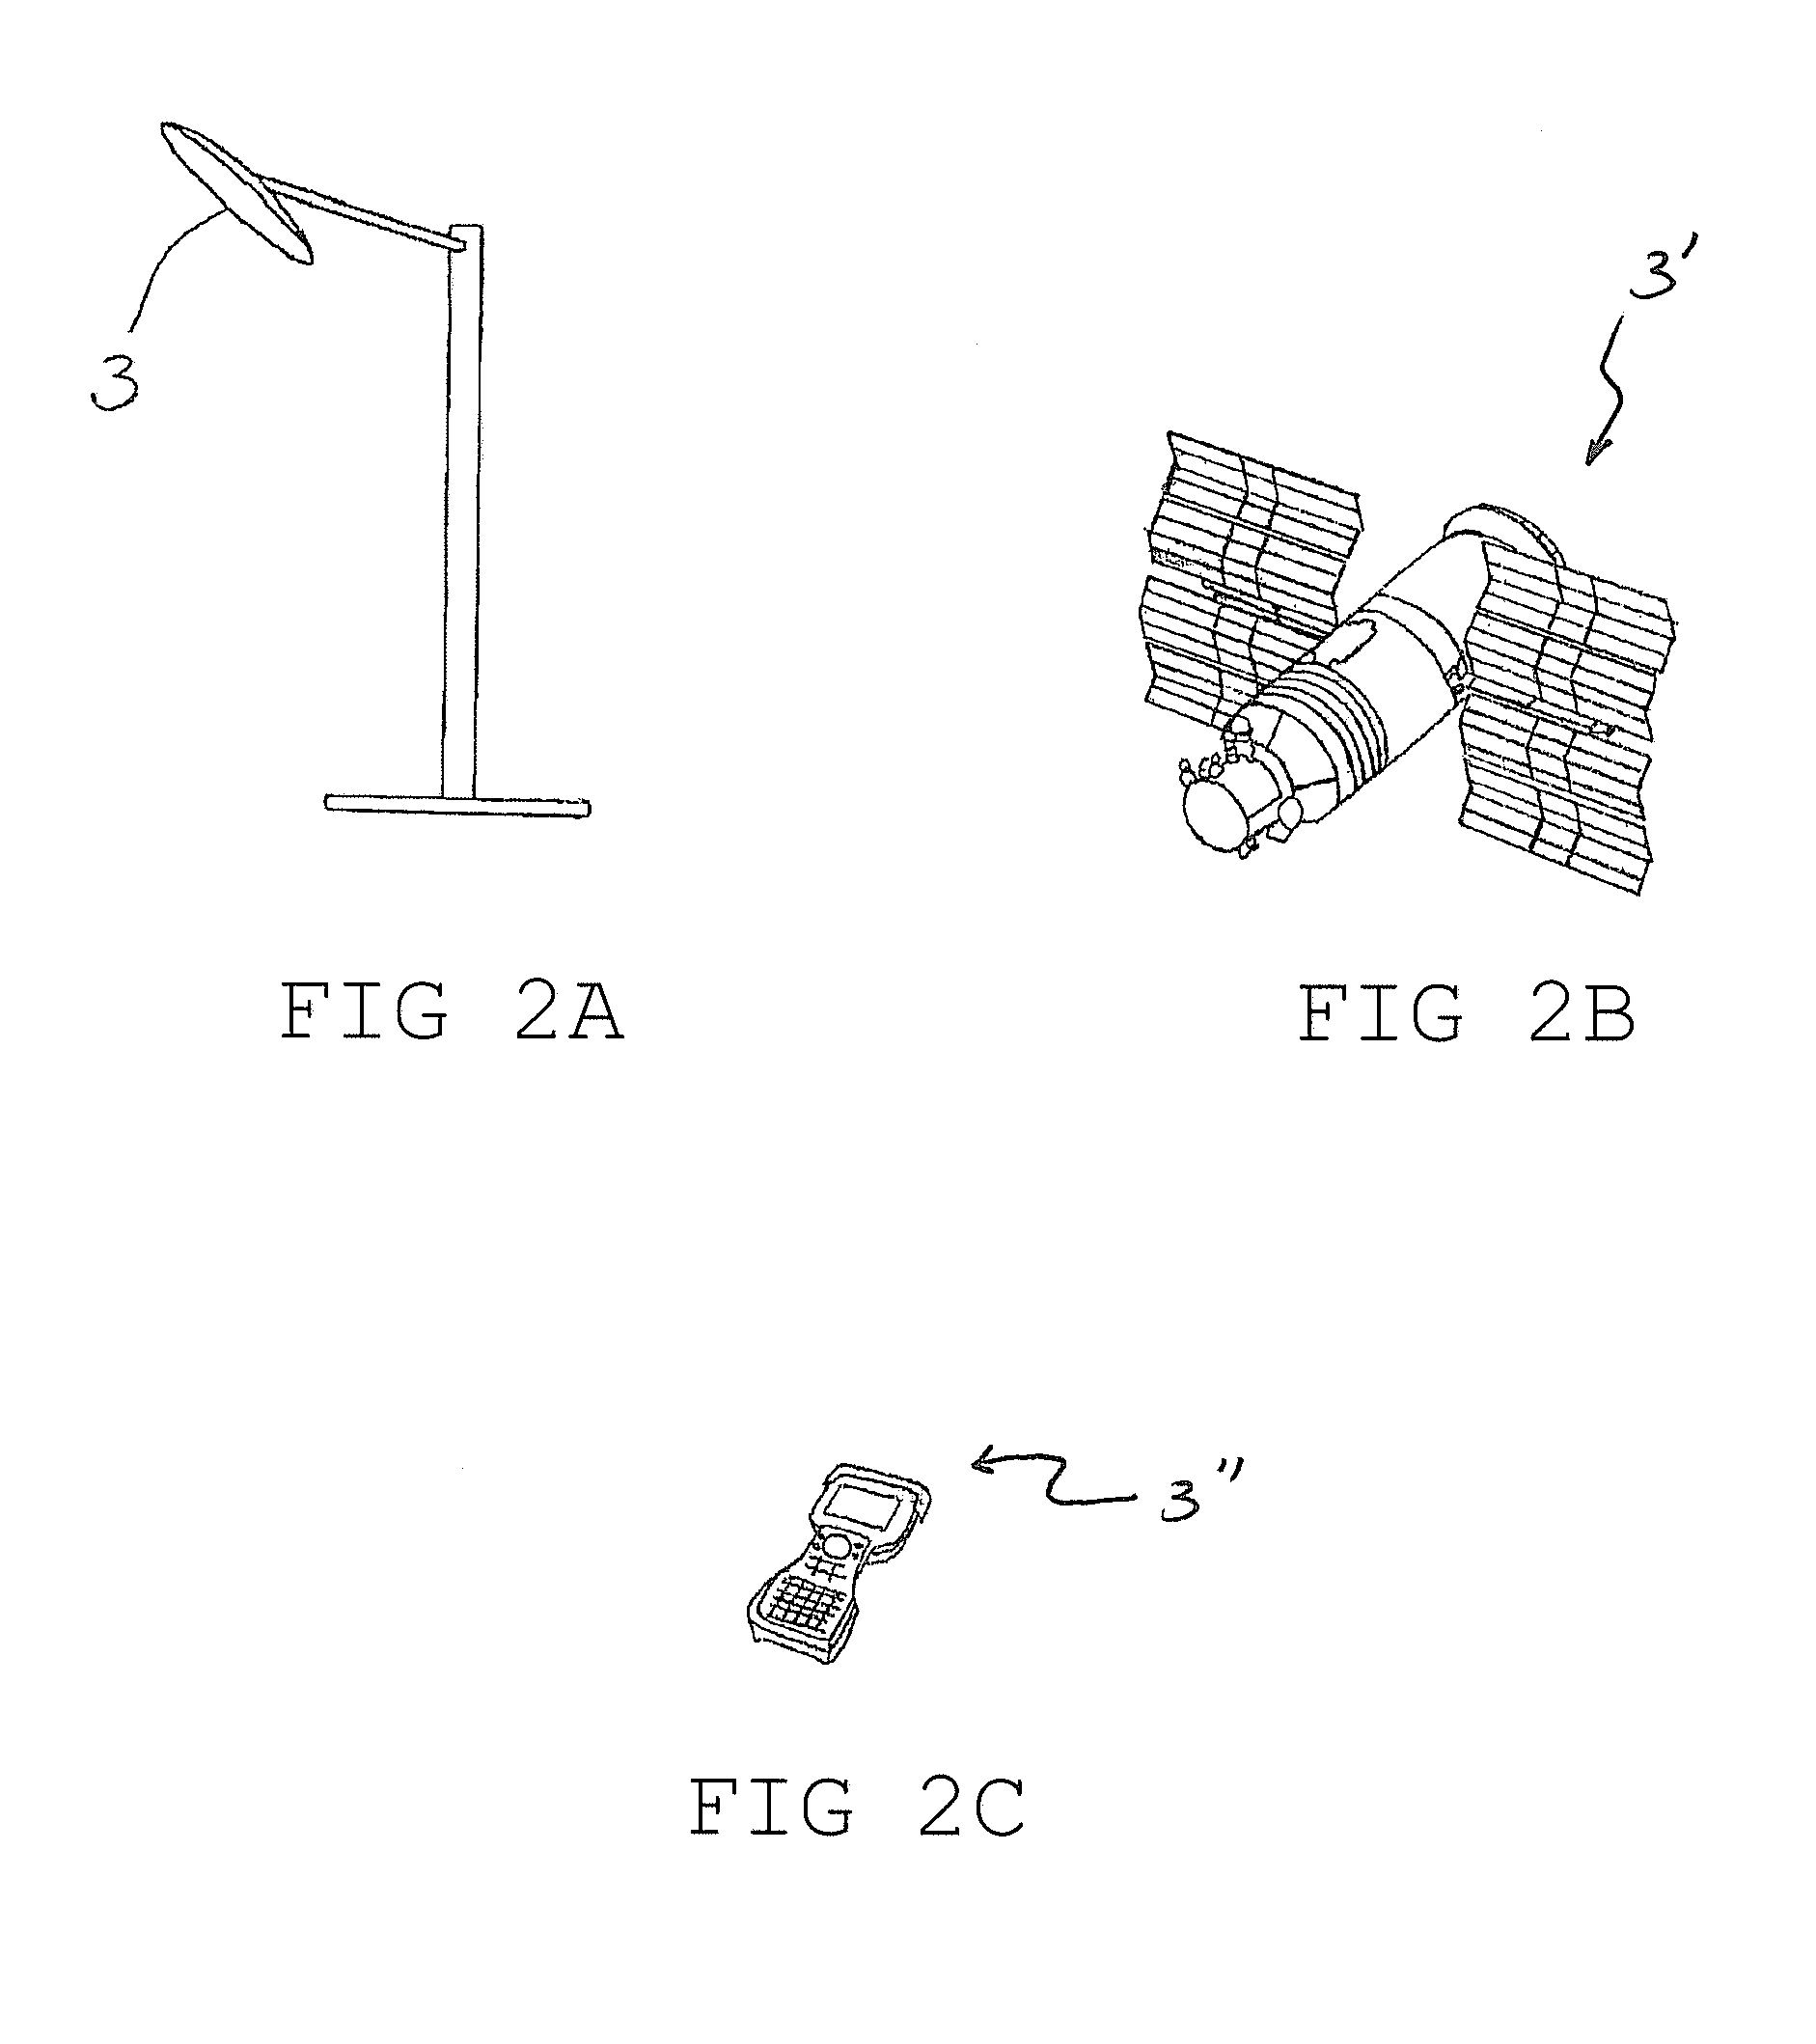 System and method for identifying vehicles and collecting fees for vehicle uses of land-ways, sea-ways and air-ways